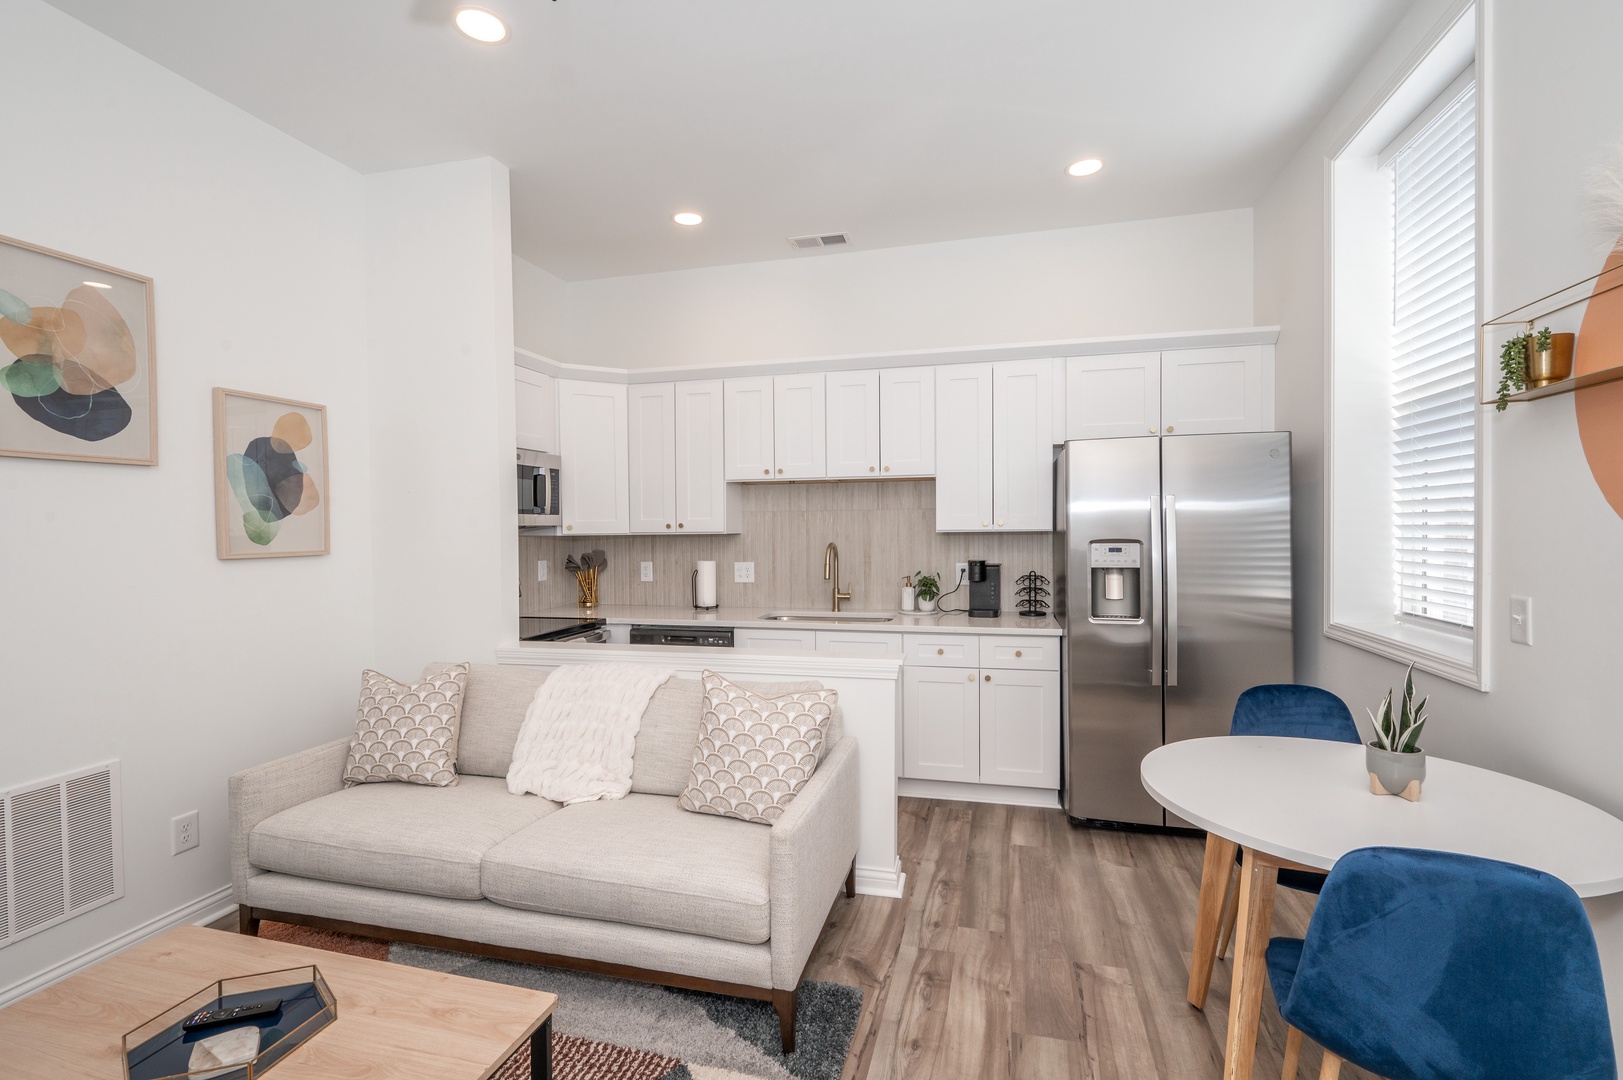 Unit 202: Enjoy the open layout of the light-filled living/dining & kitchen areas